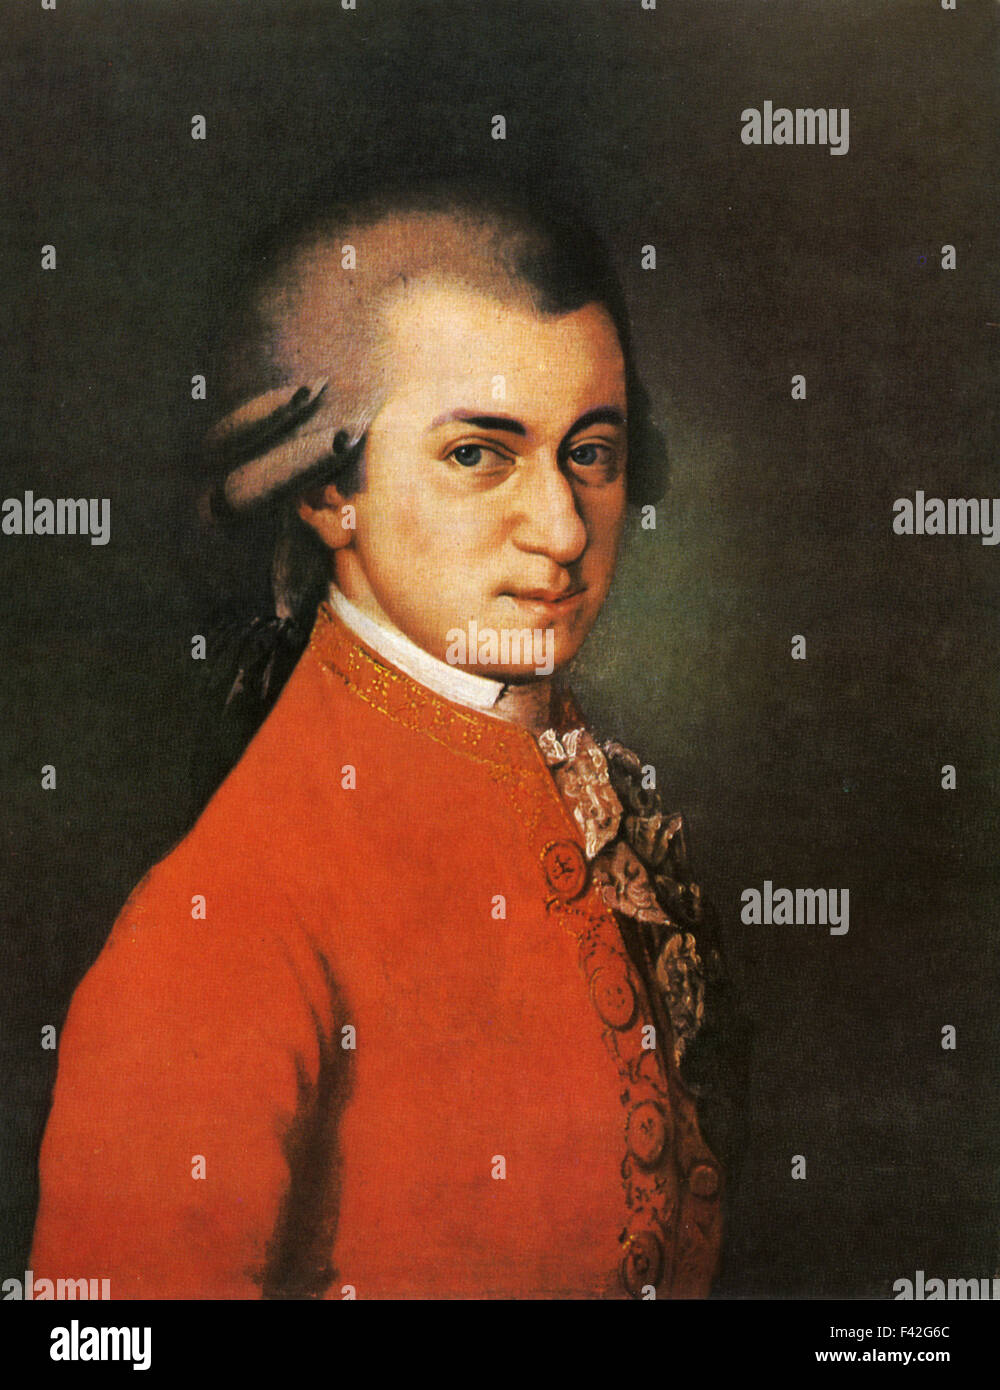 WOLFGANG AMADEUS MOZART (1756-1791) Austrian composer about 1780 from the portrait by Johann Croce. Stock Photo